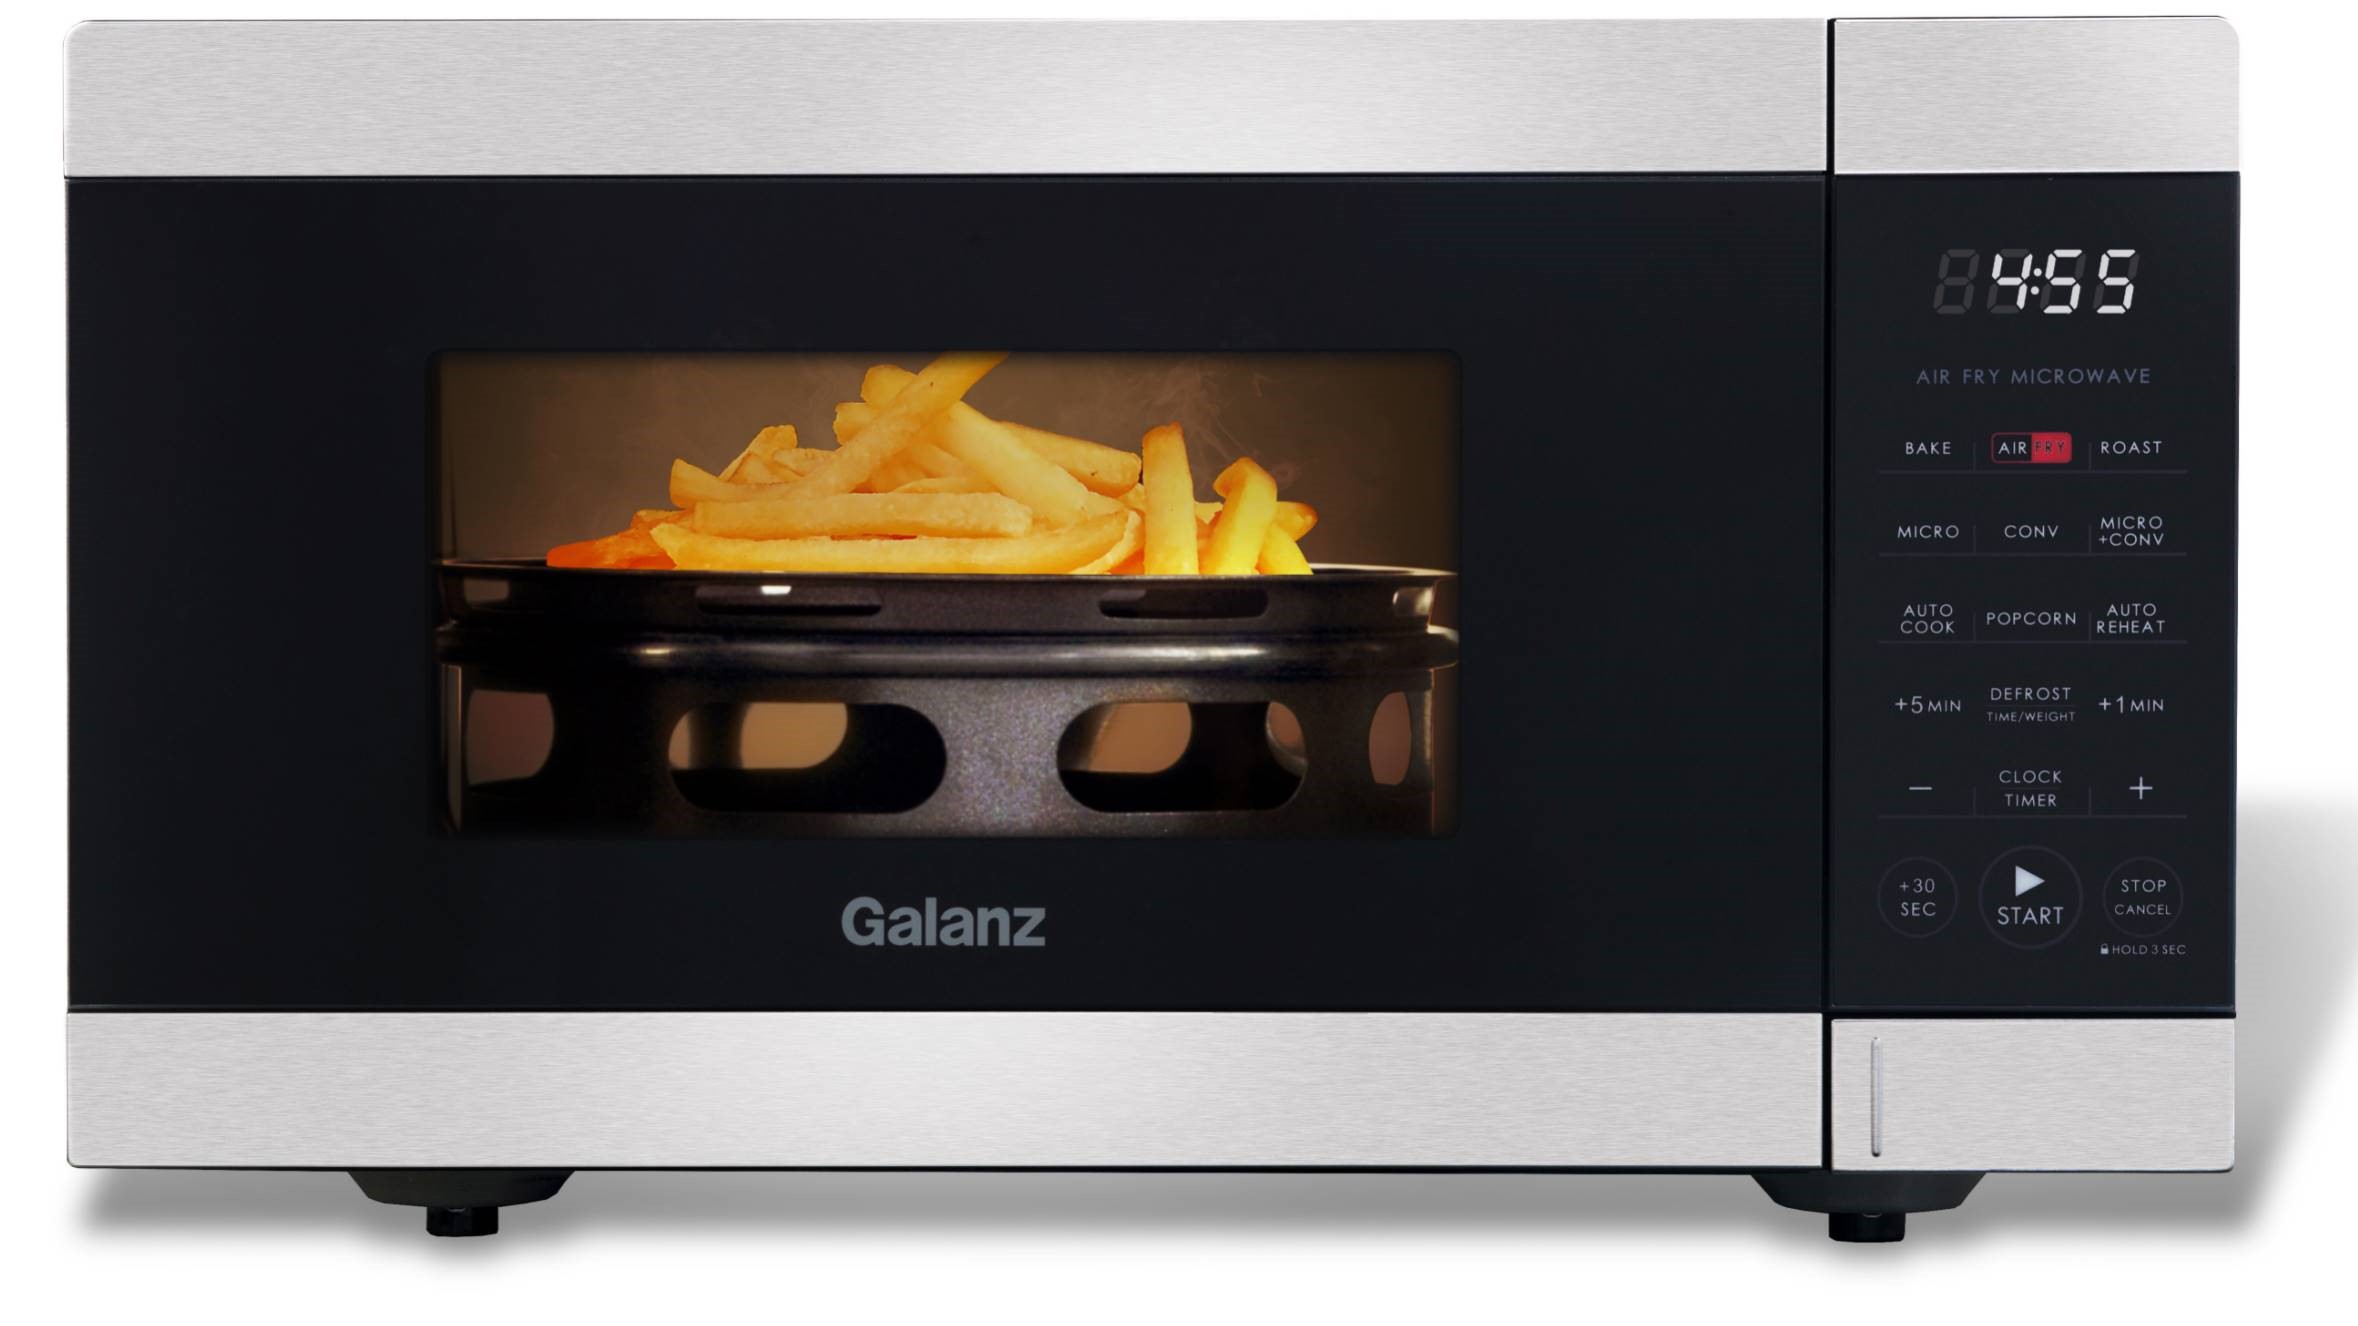 Galanz 0.9 Cu ft Air Fry Countertop Microwave, 900 Watts, Stainless Steel, New - image 1 of 11